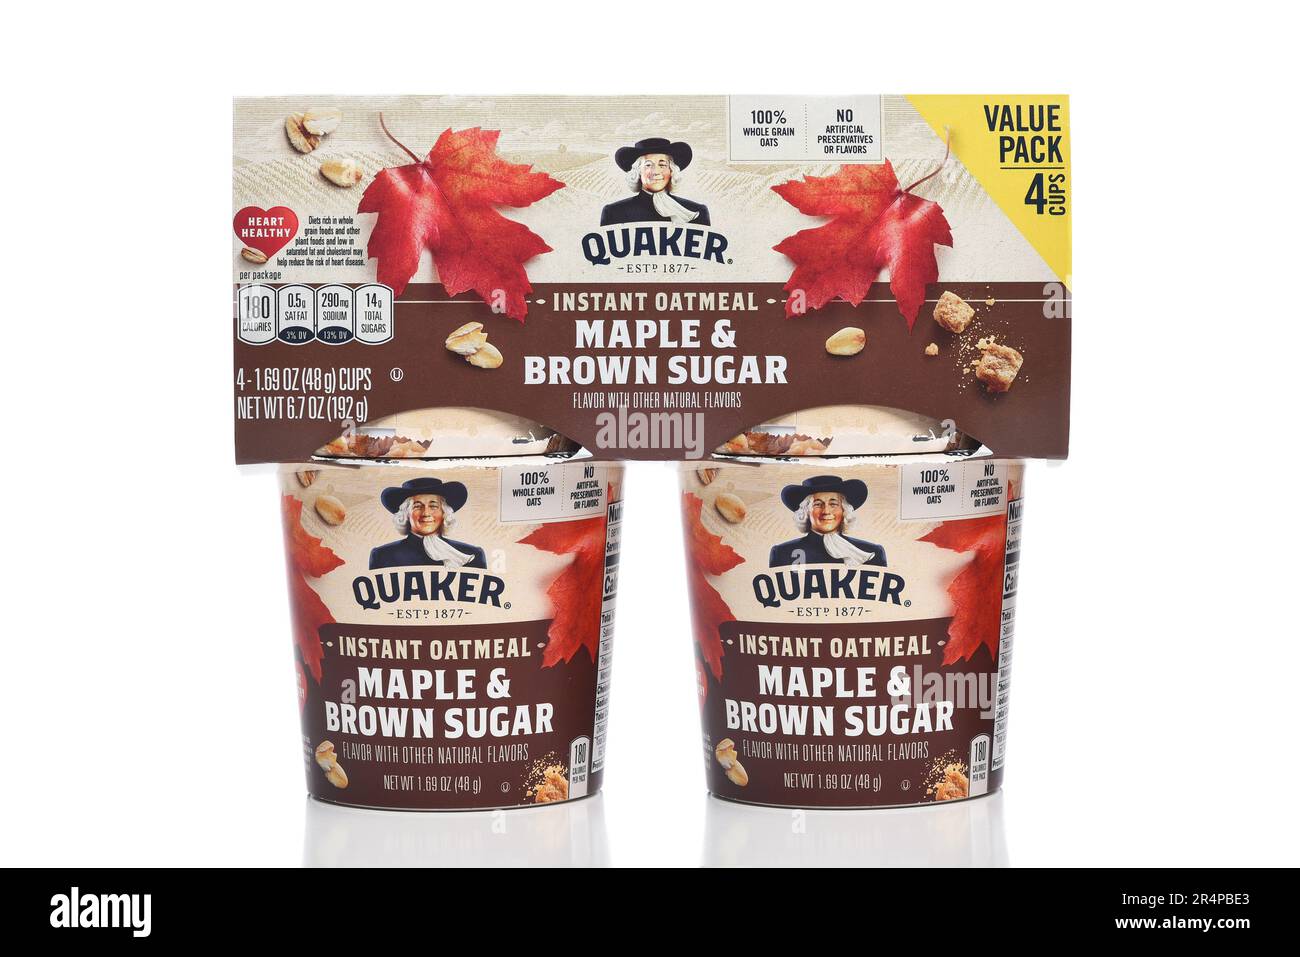 IRIVNE, CALIFORNIA - 29 MAY 20223: A 4pk of Quaker Instant Oatmeal Maple and Brown Sugar flavor individual serving cups. Stock Photo